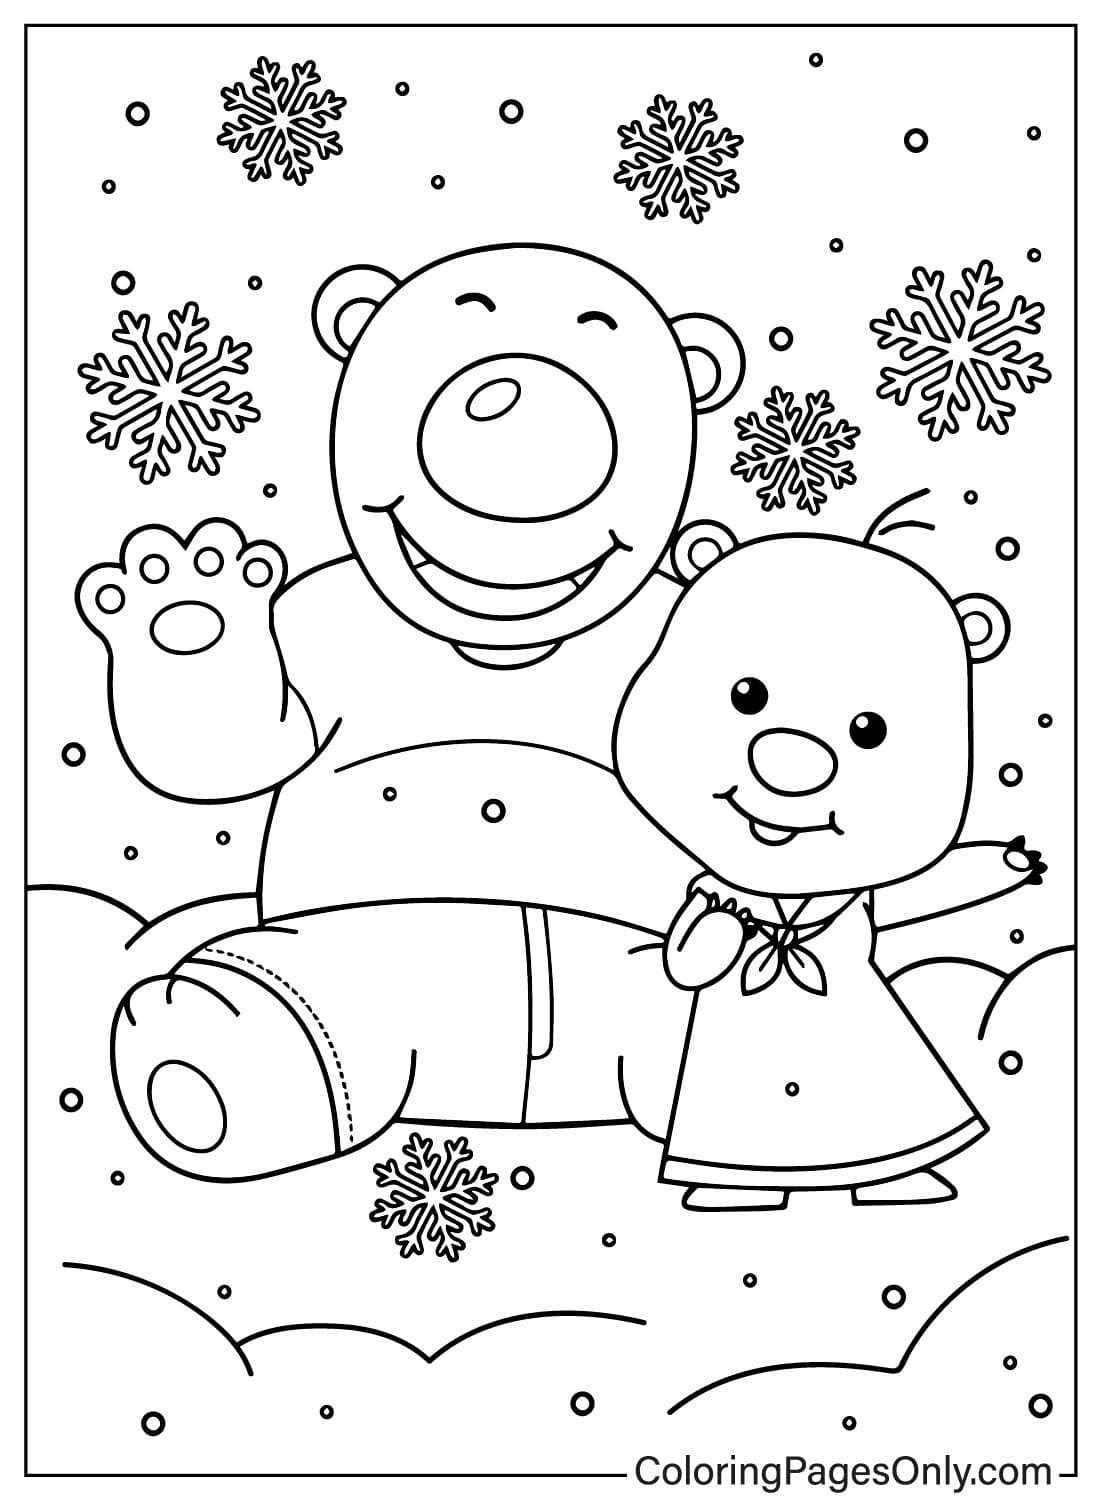 Poby and Loopy Free Coloring Page from Pororo the Little Penguin